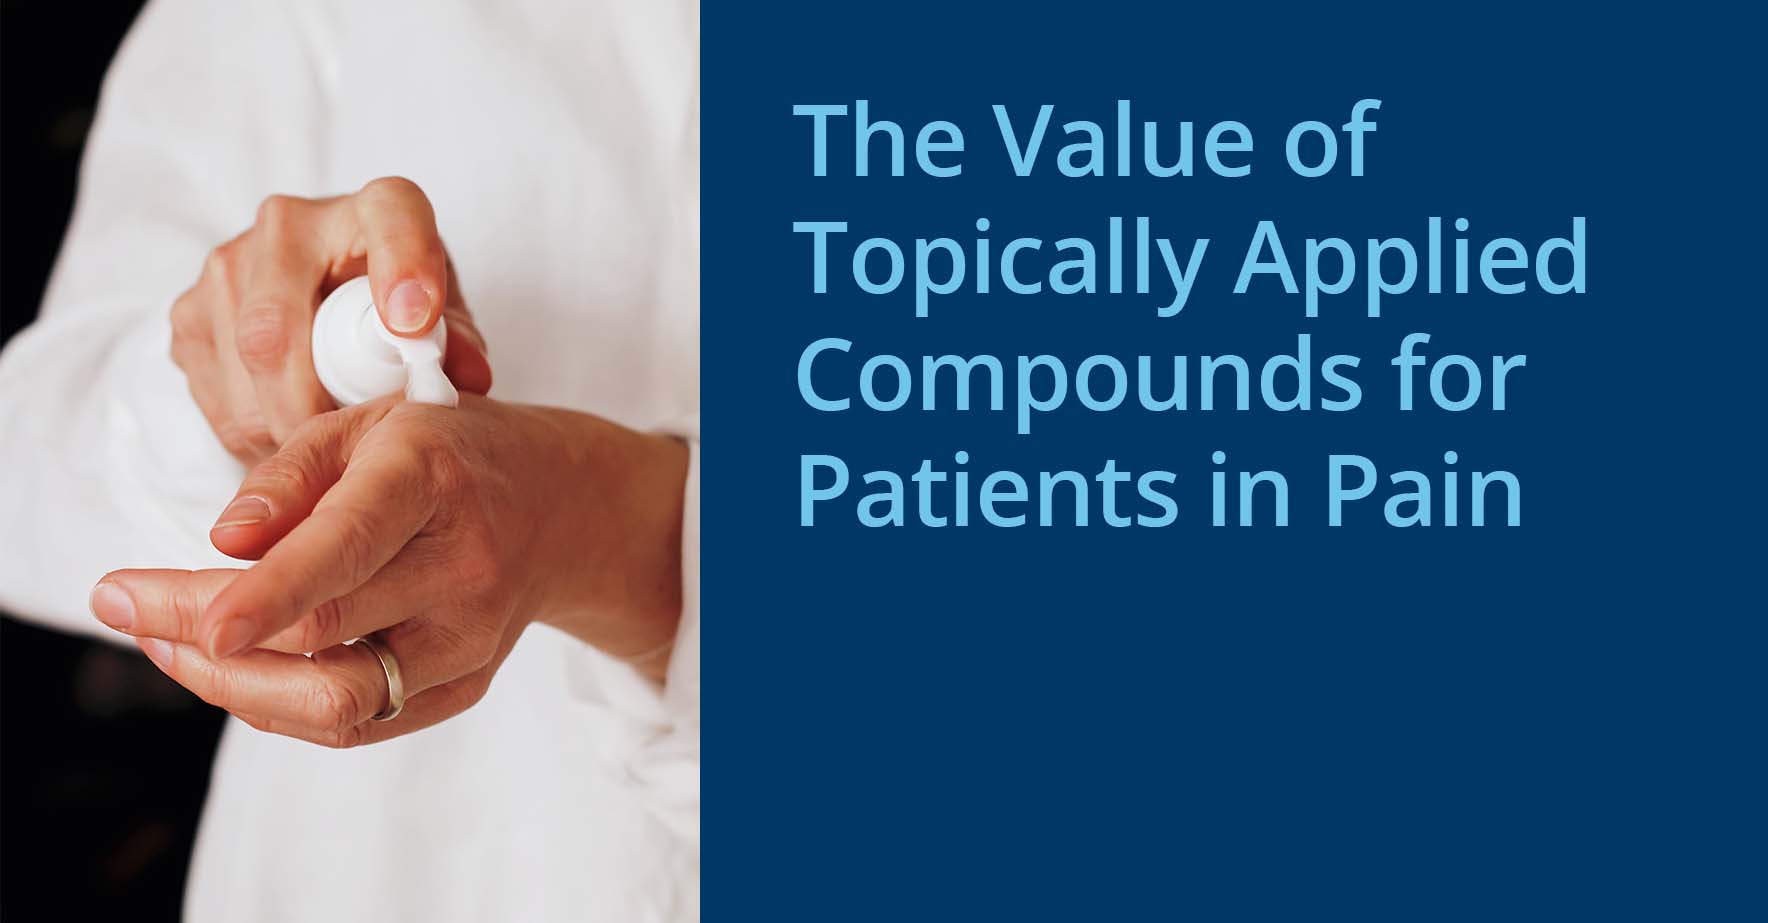 The_Value_of_Topically_Applied_Compounds_for_Patients_in_Pain.jpg